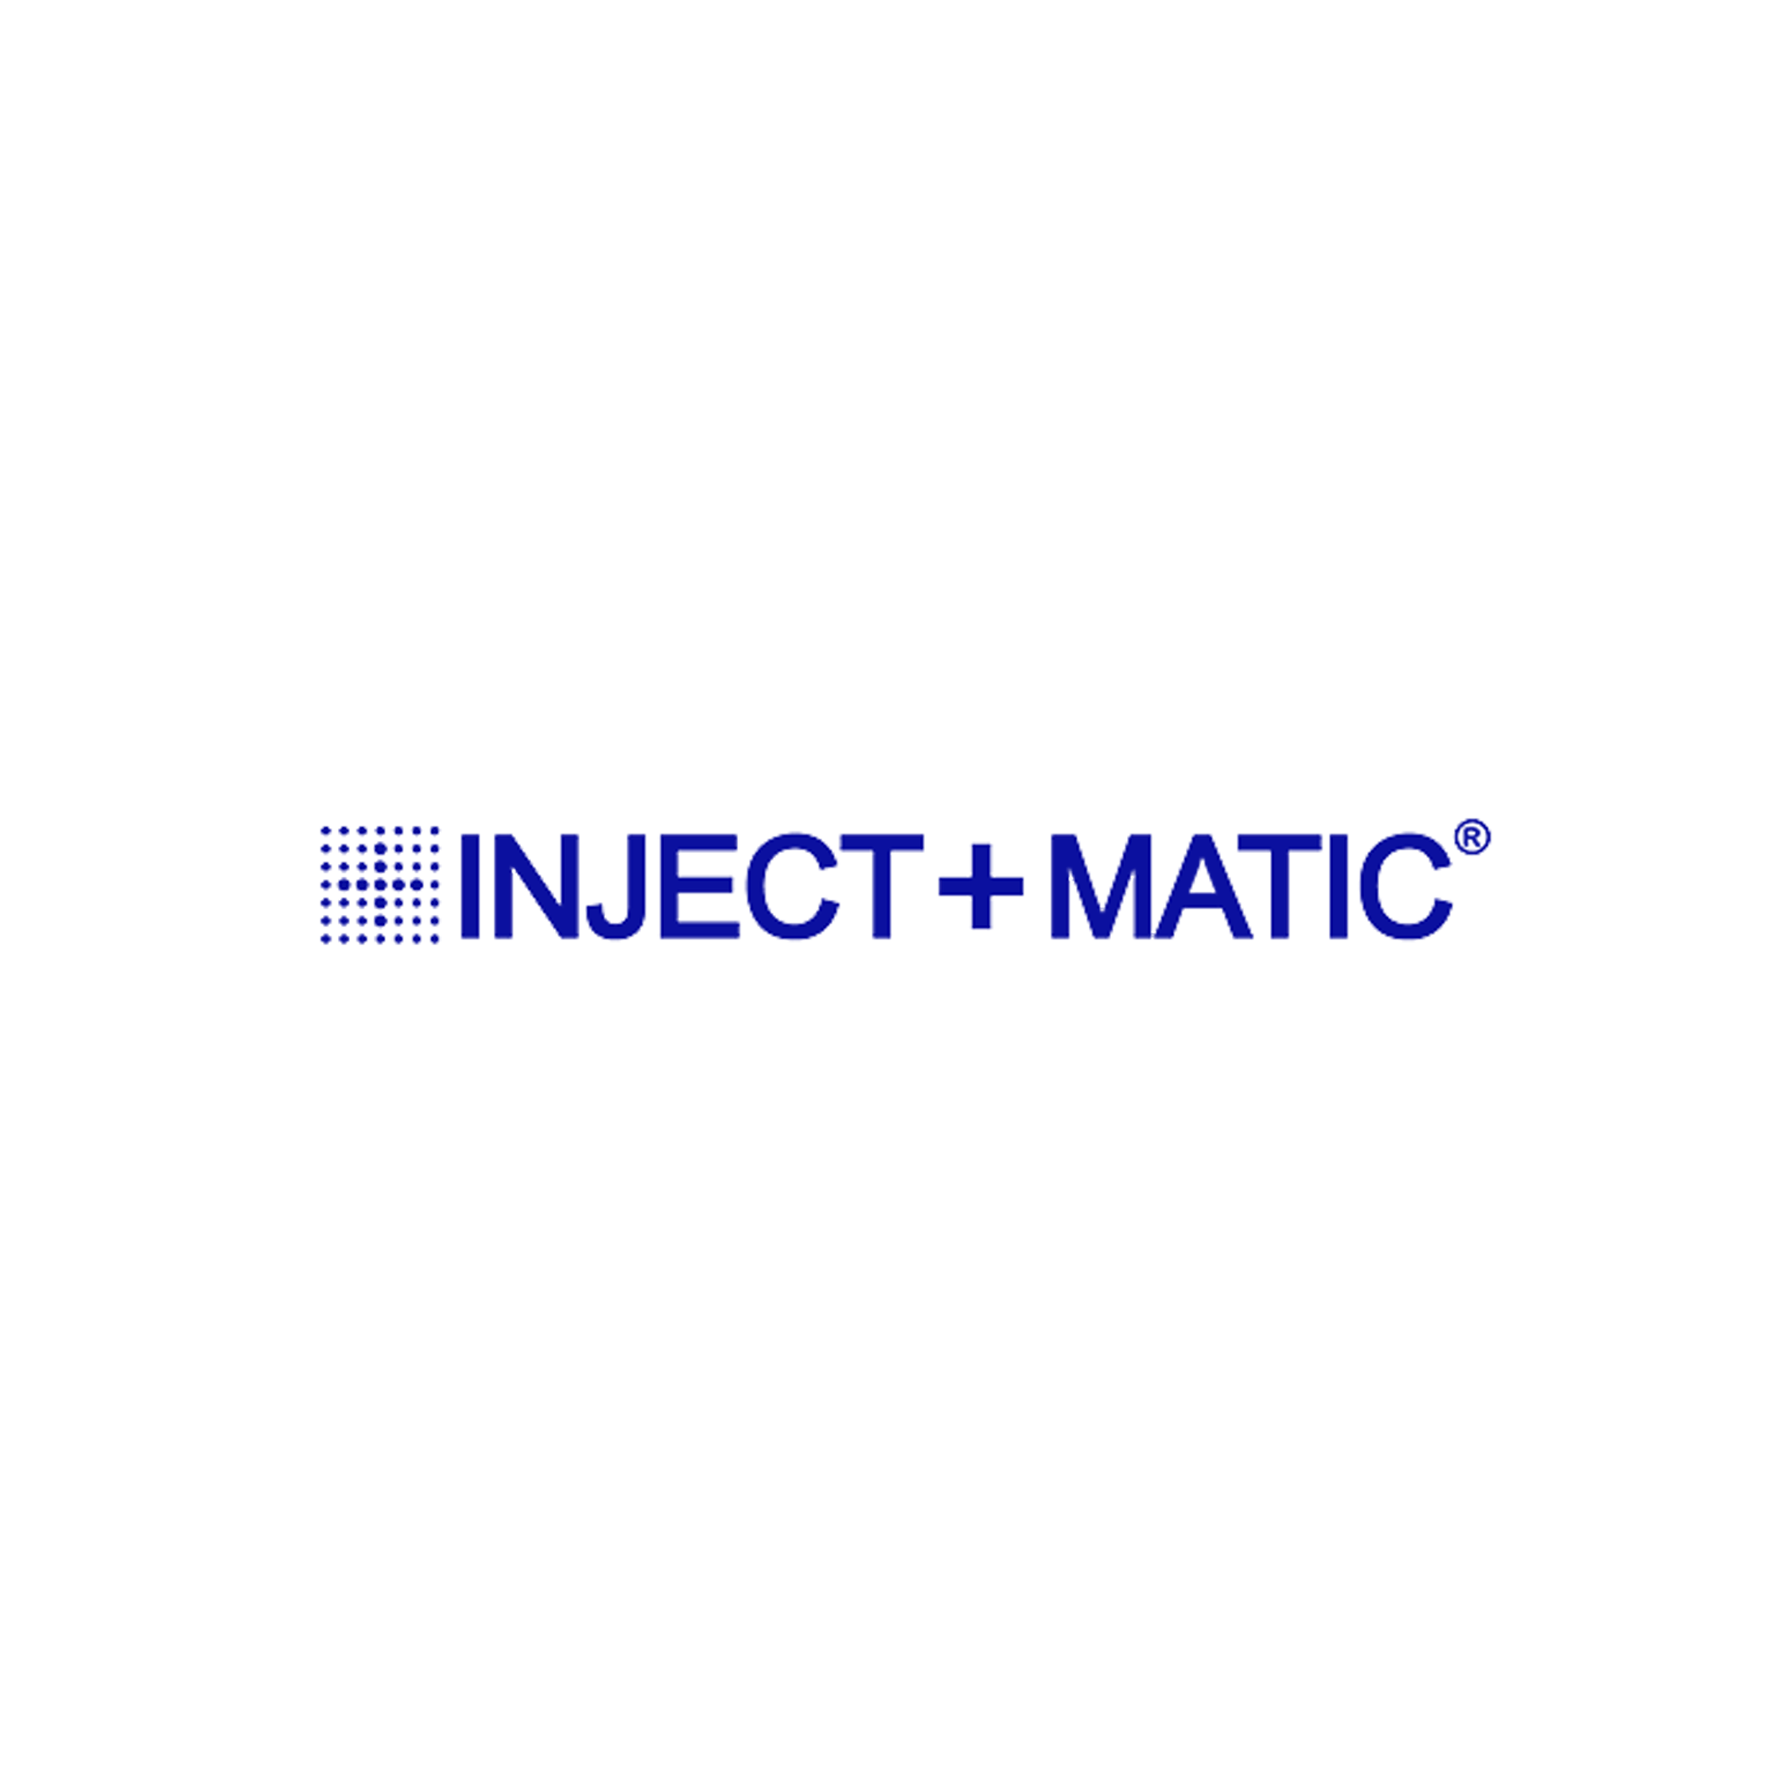 INJECT+MATIC